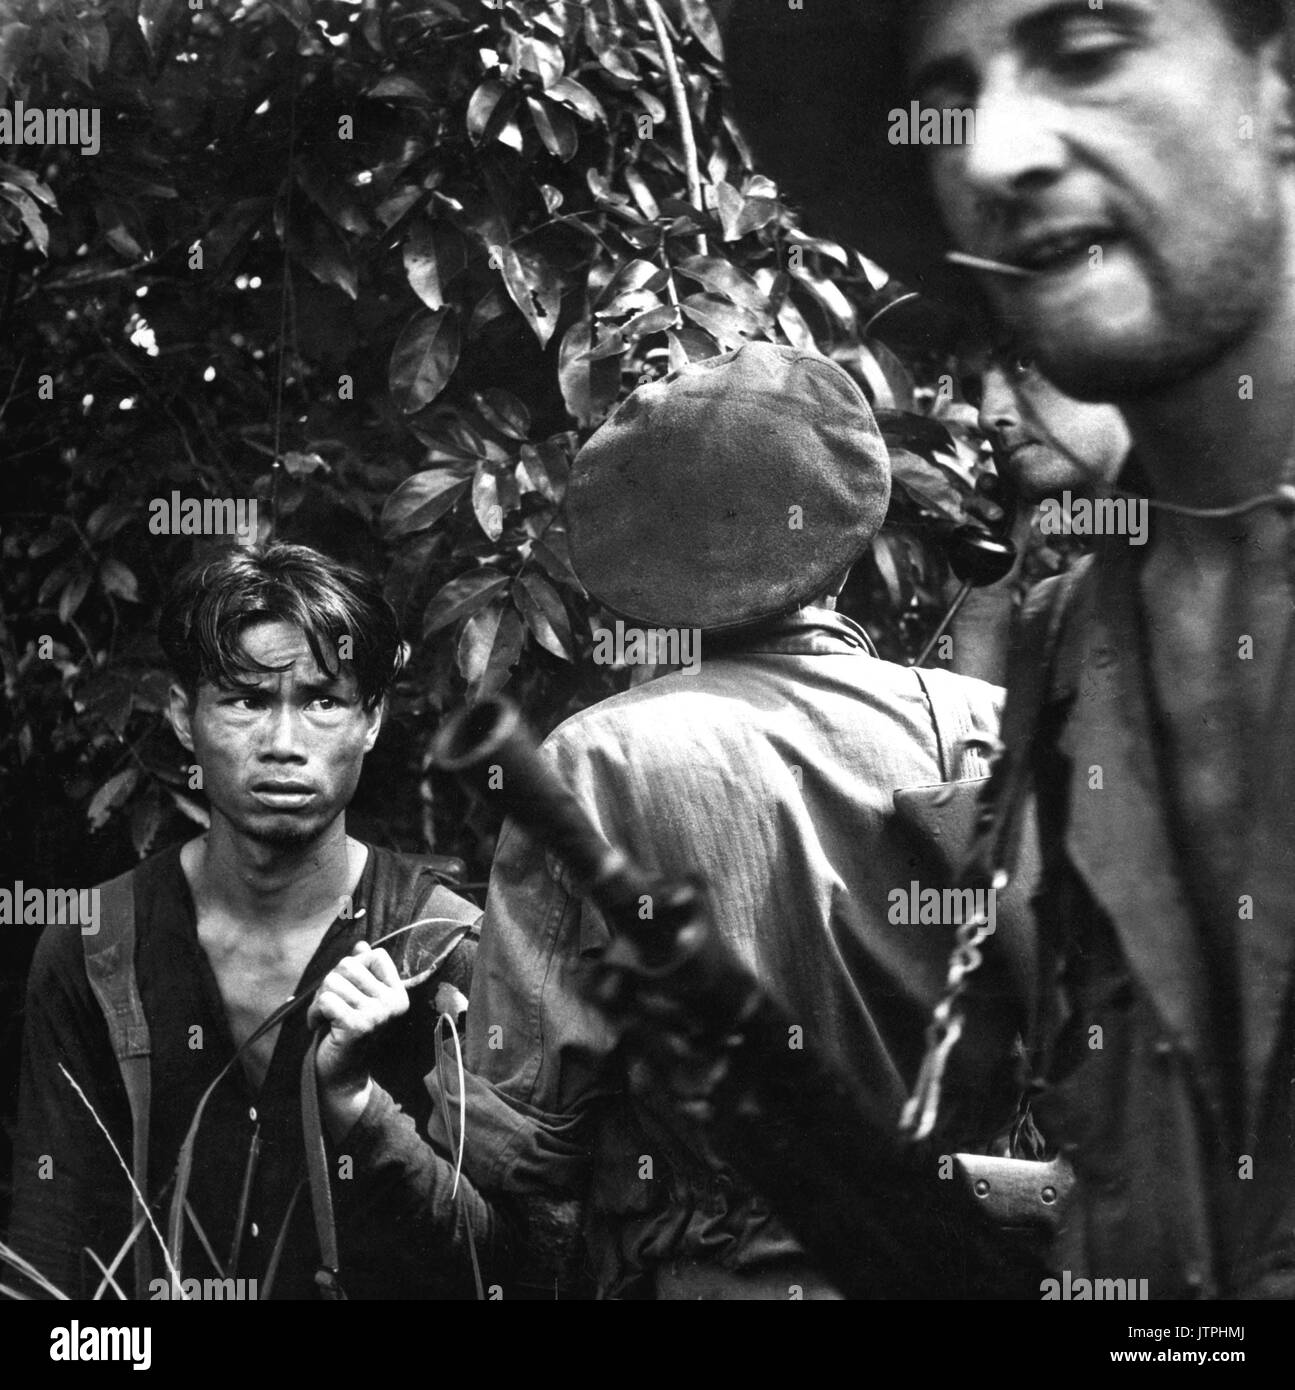 The French Foreign Legion is playing the major combat role in the war against the Vietminh.  Here a red-suspect has been found hiding in the jungle and is now being questioned by the advance patrol, who caught him.  Ca.  1954.  Pix.  (USIA) EXACT DATE SHOT UNKNOWN NARA FILE #:  306-PS-55-10516 WAR & CONFLICT BOOK #:  383 Stock Photo